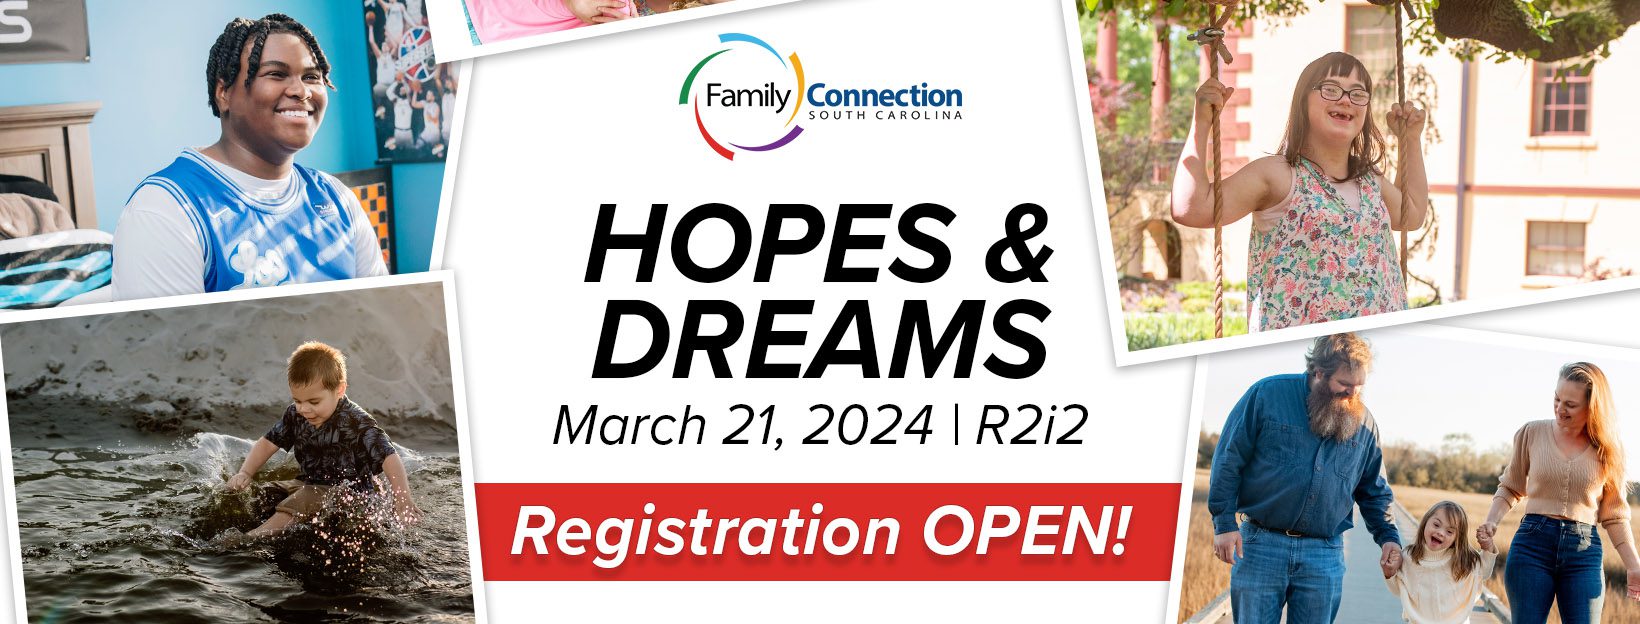 Family Connection South Carolina to Host 2024 Hopes & Dreams Conference